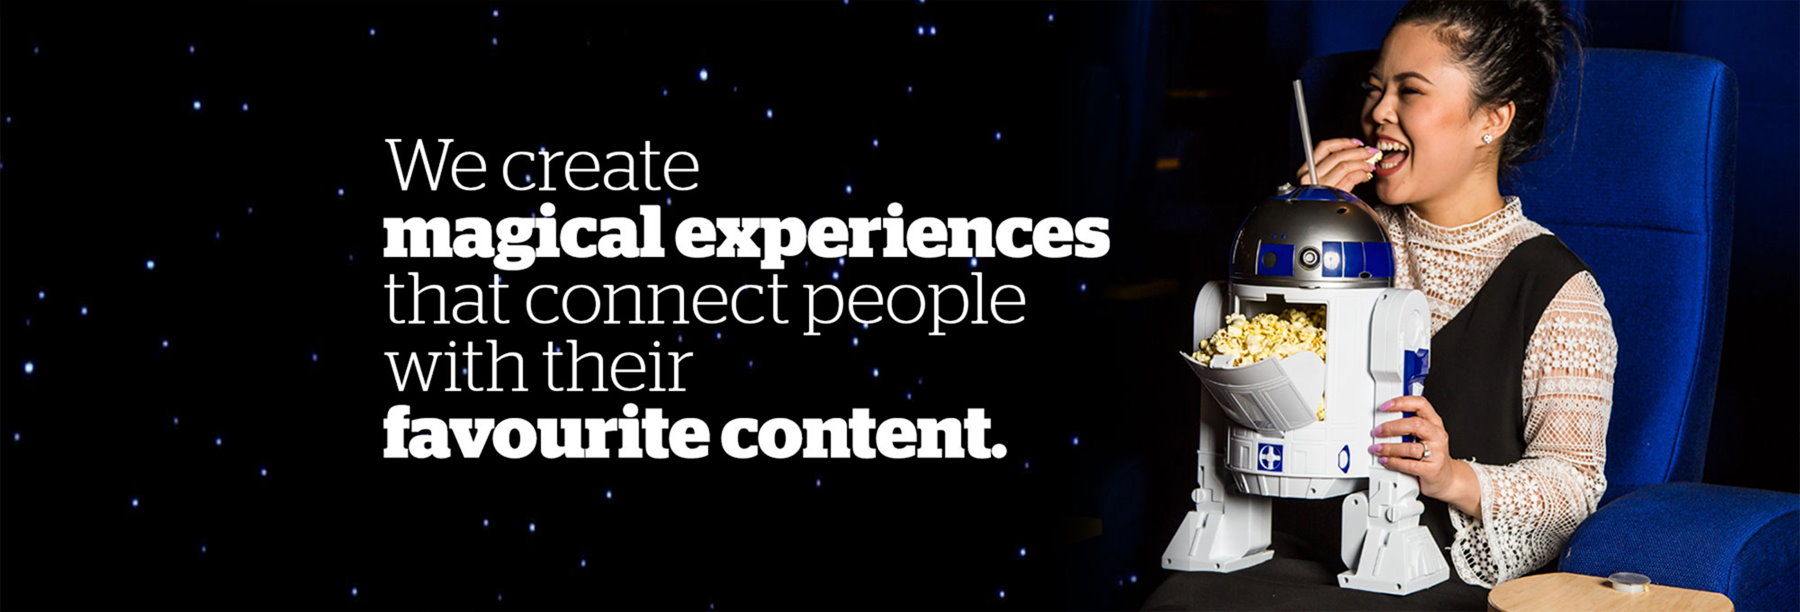 We create magical experiences that connect people with their favourite content.